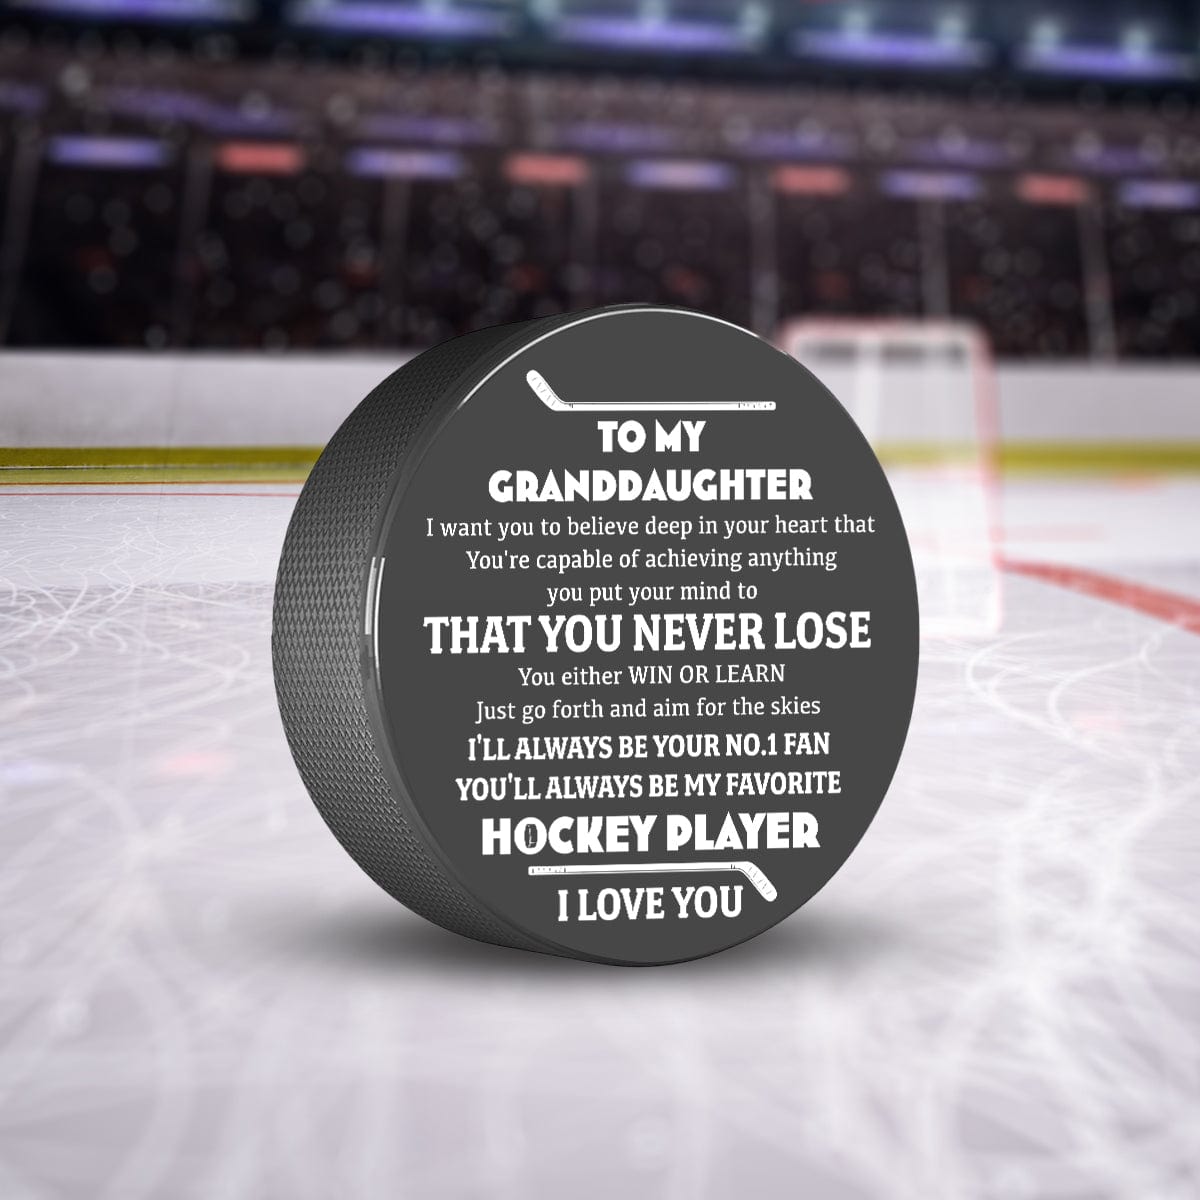 Hockey Puck - Hockey - To My Granddaughter - You're Capable of Achieving Anything - Gai23005